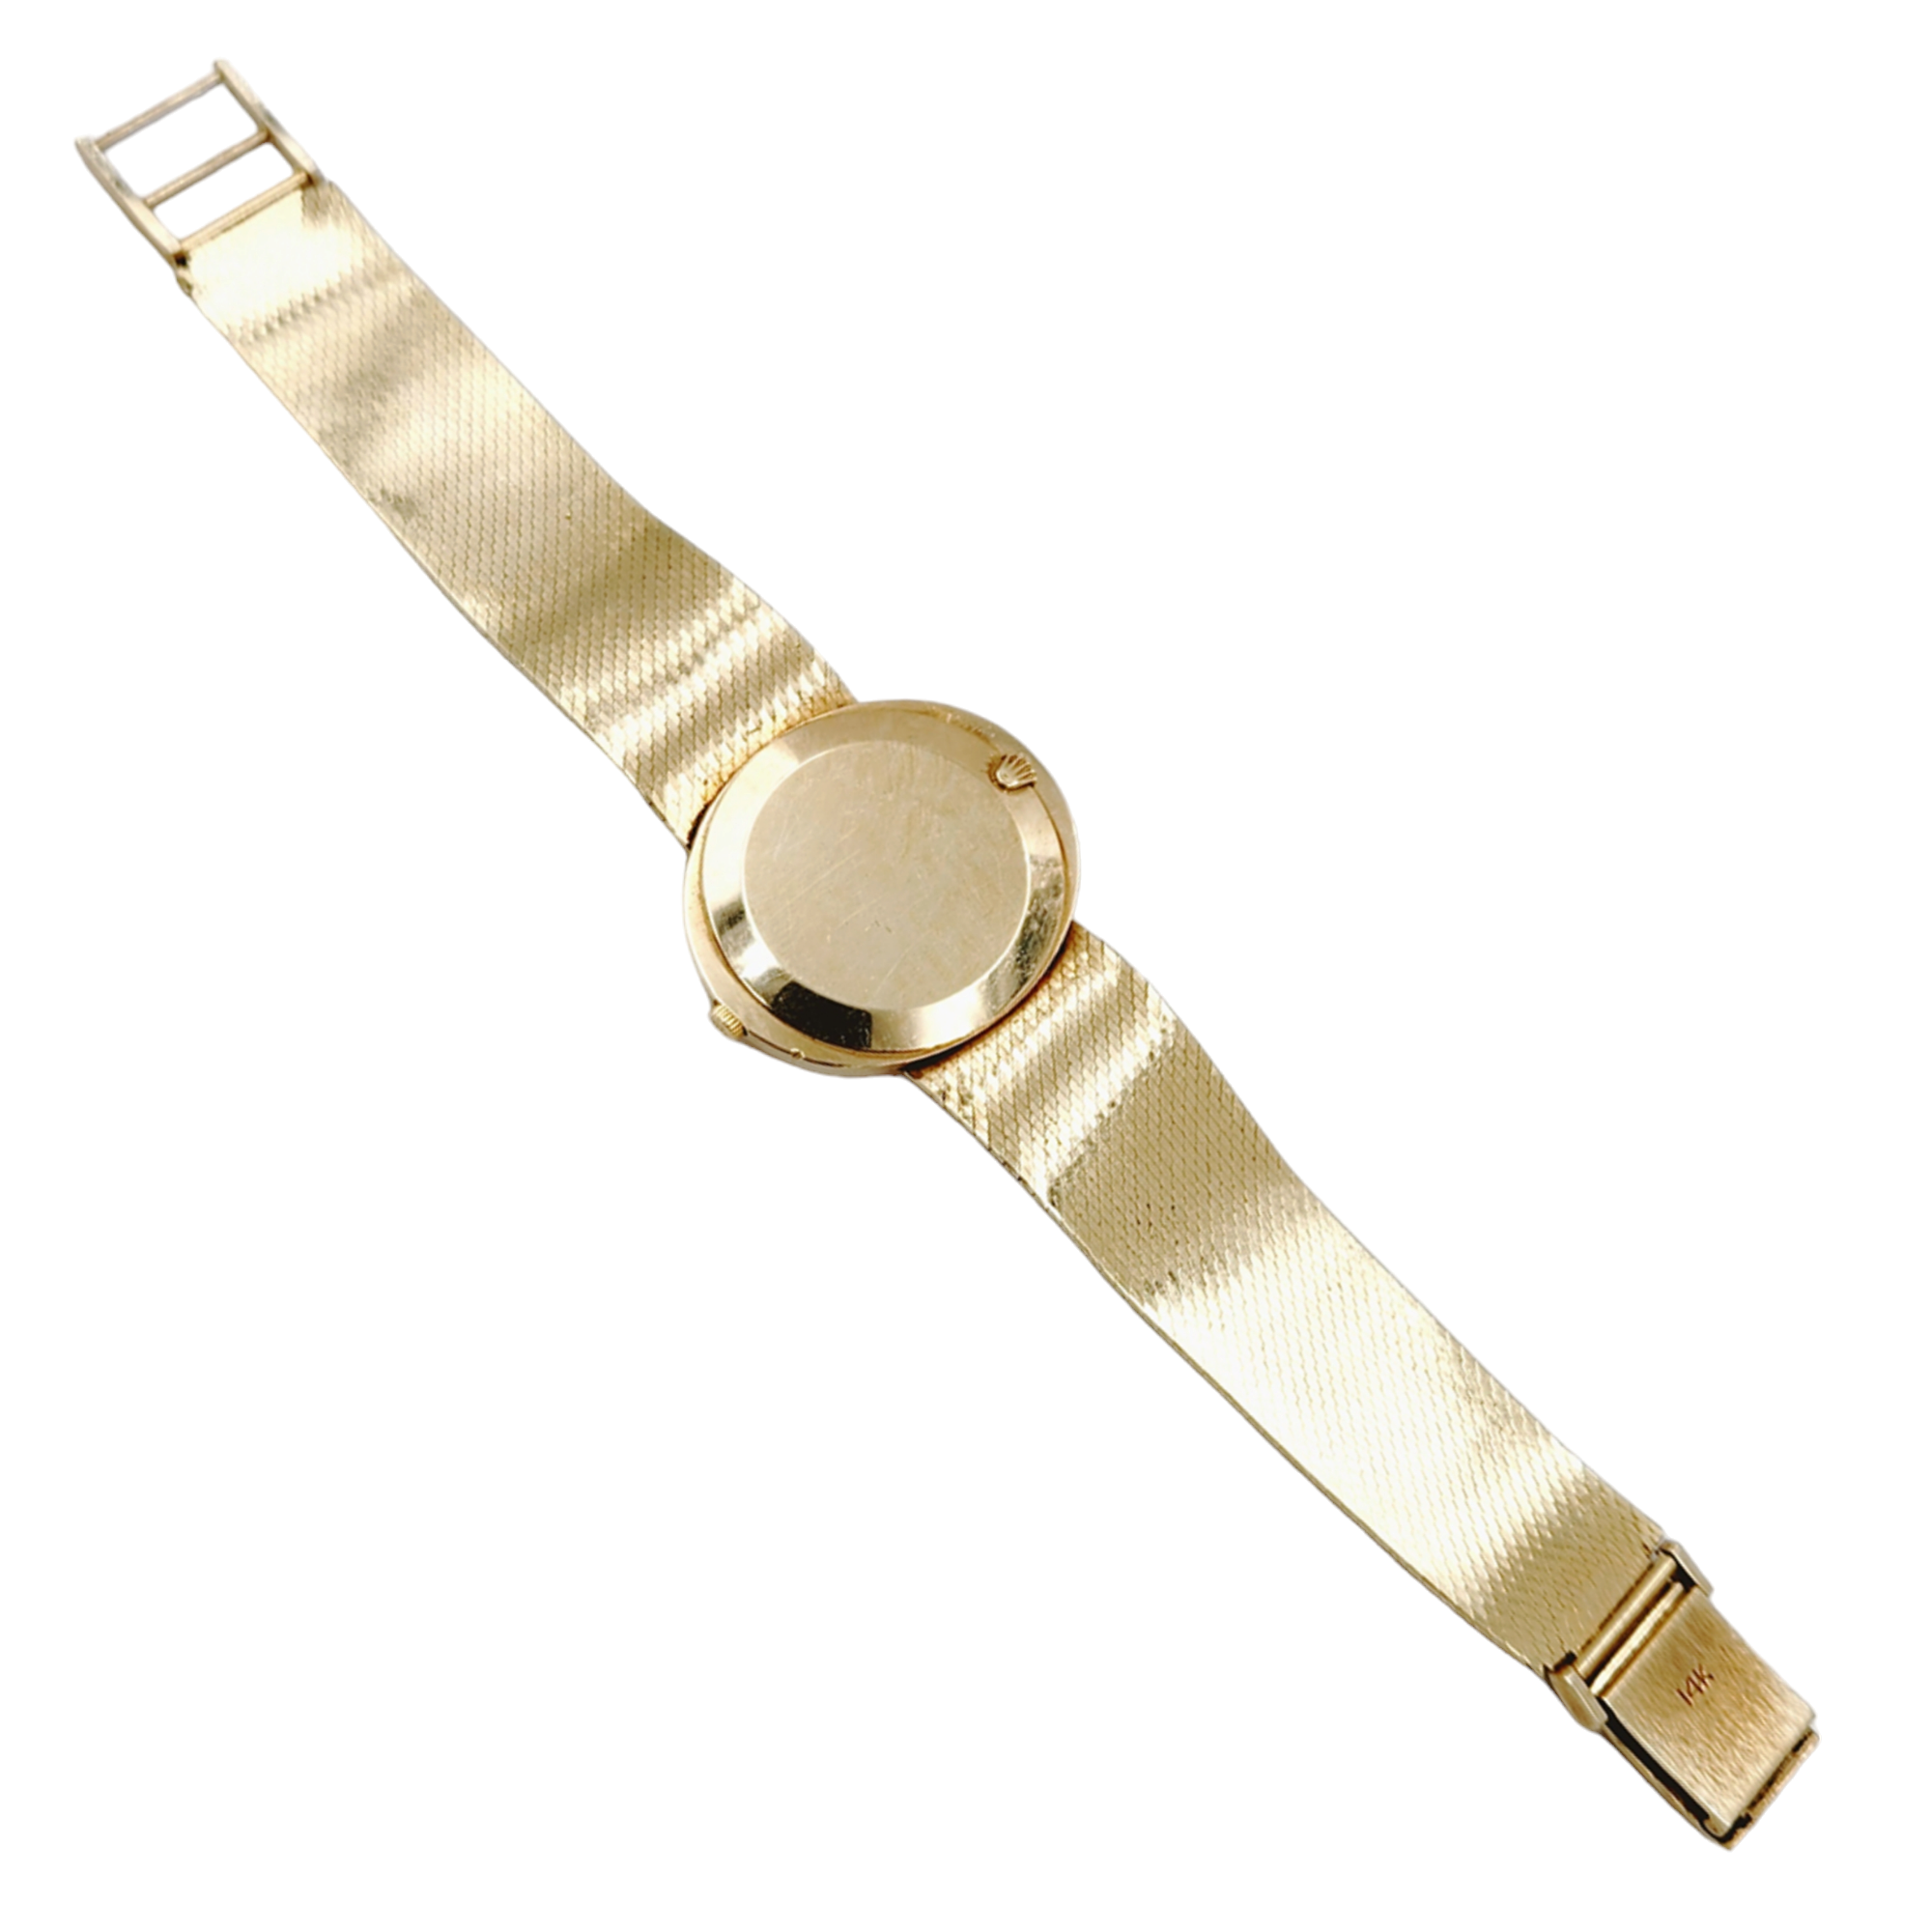 Rolex Cellini Vintage 14K Yellow Gold Wristwatch w/ Light Champagne Dial & Smooth Bezel. (Pre-Owned)